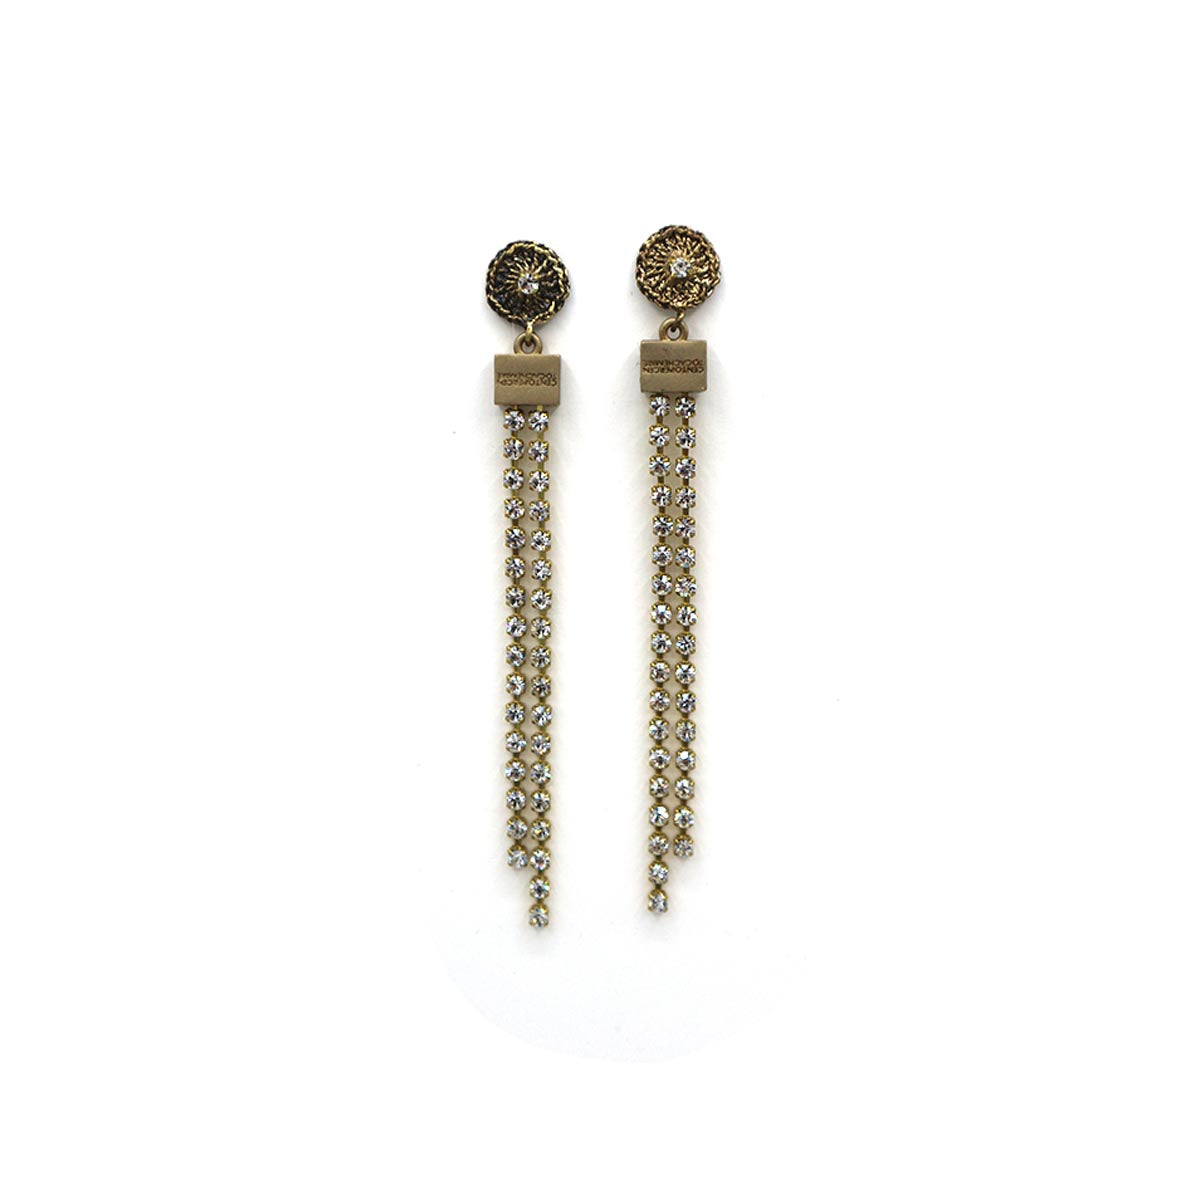 CENTOPERCENTO CACHEMIRE Antique bronze and strass earrings 